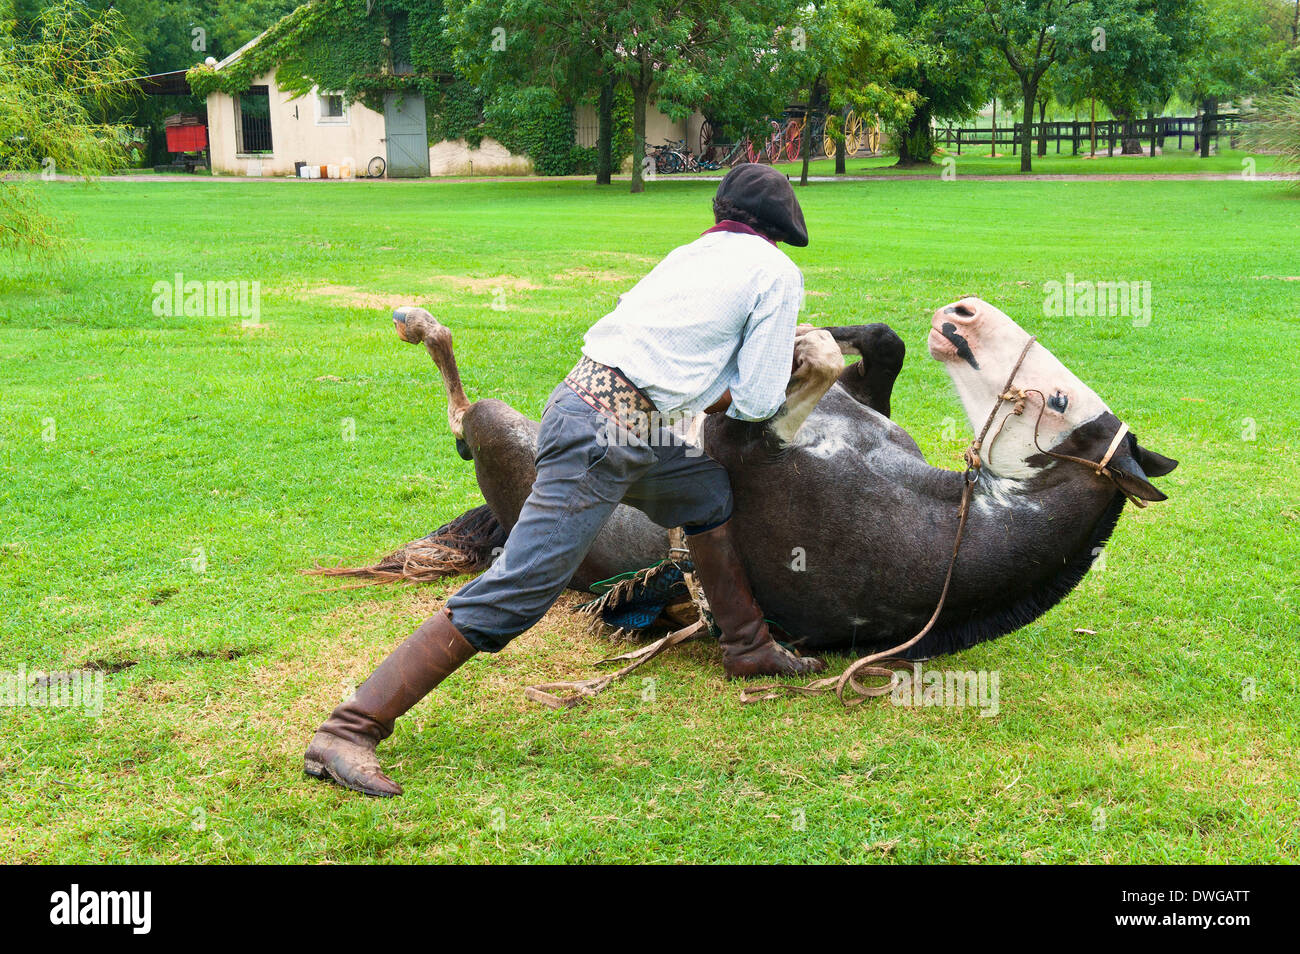 Gaucho demonstrating his skills, with Horse, San Antonio de Areco, Buenos Aires Province, Argentina Stock Photo